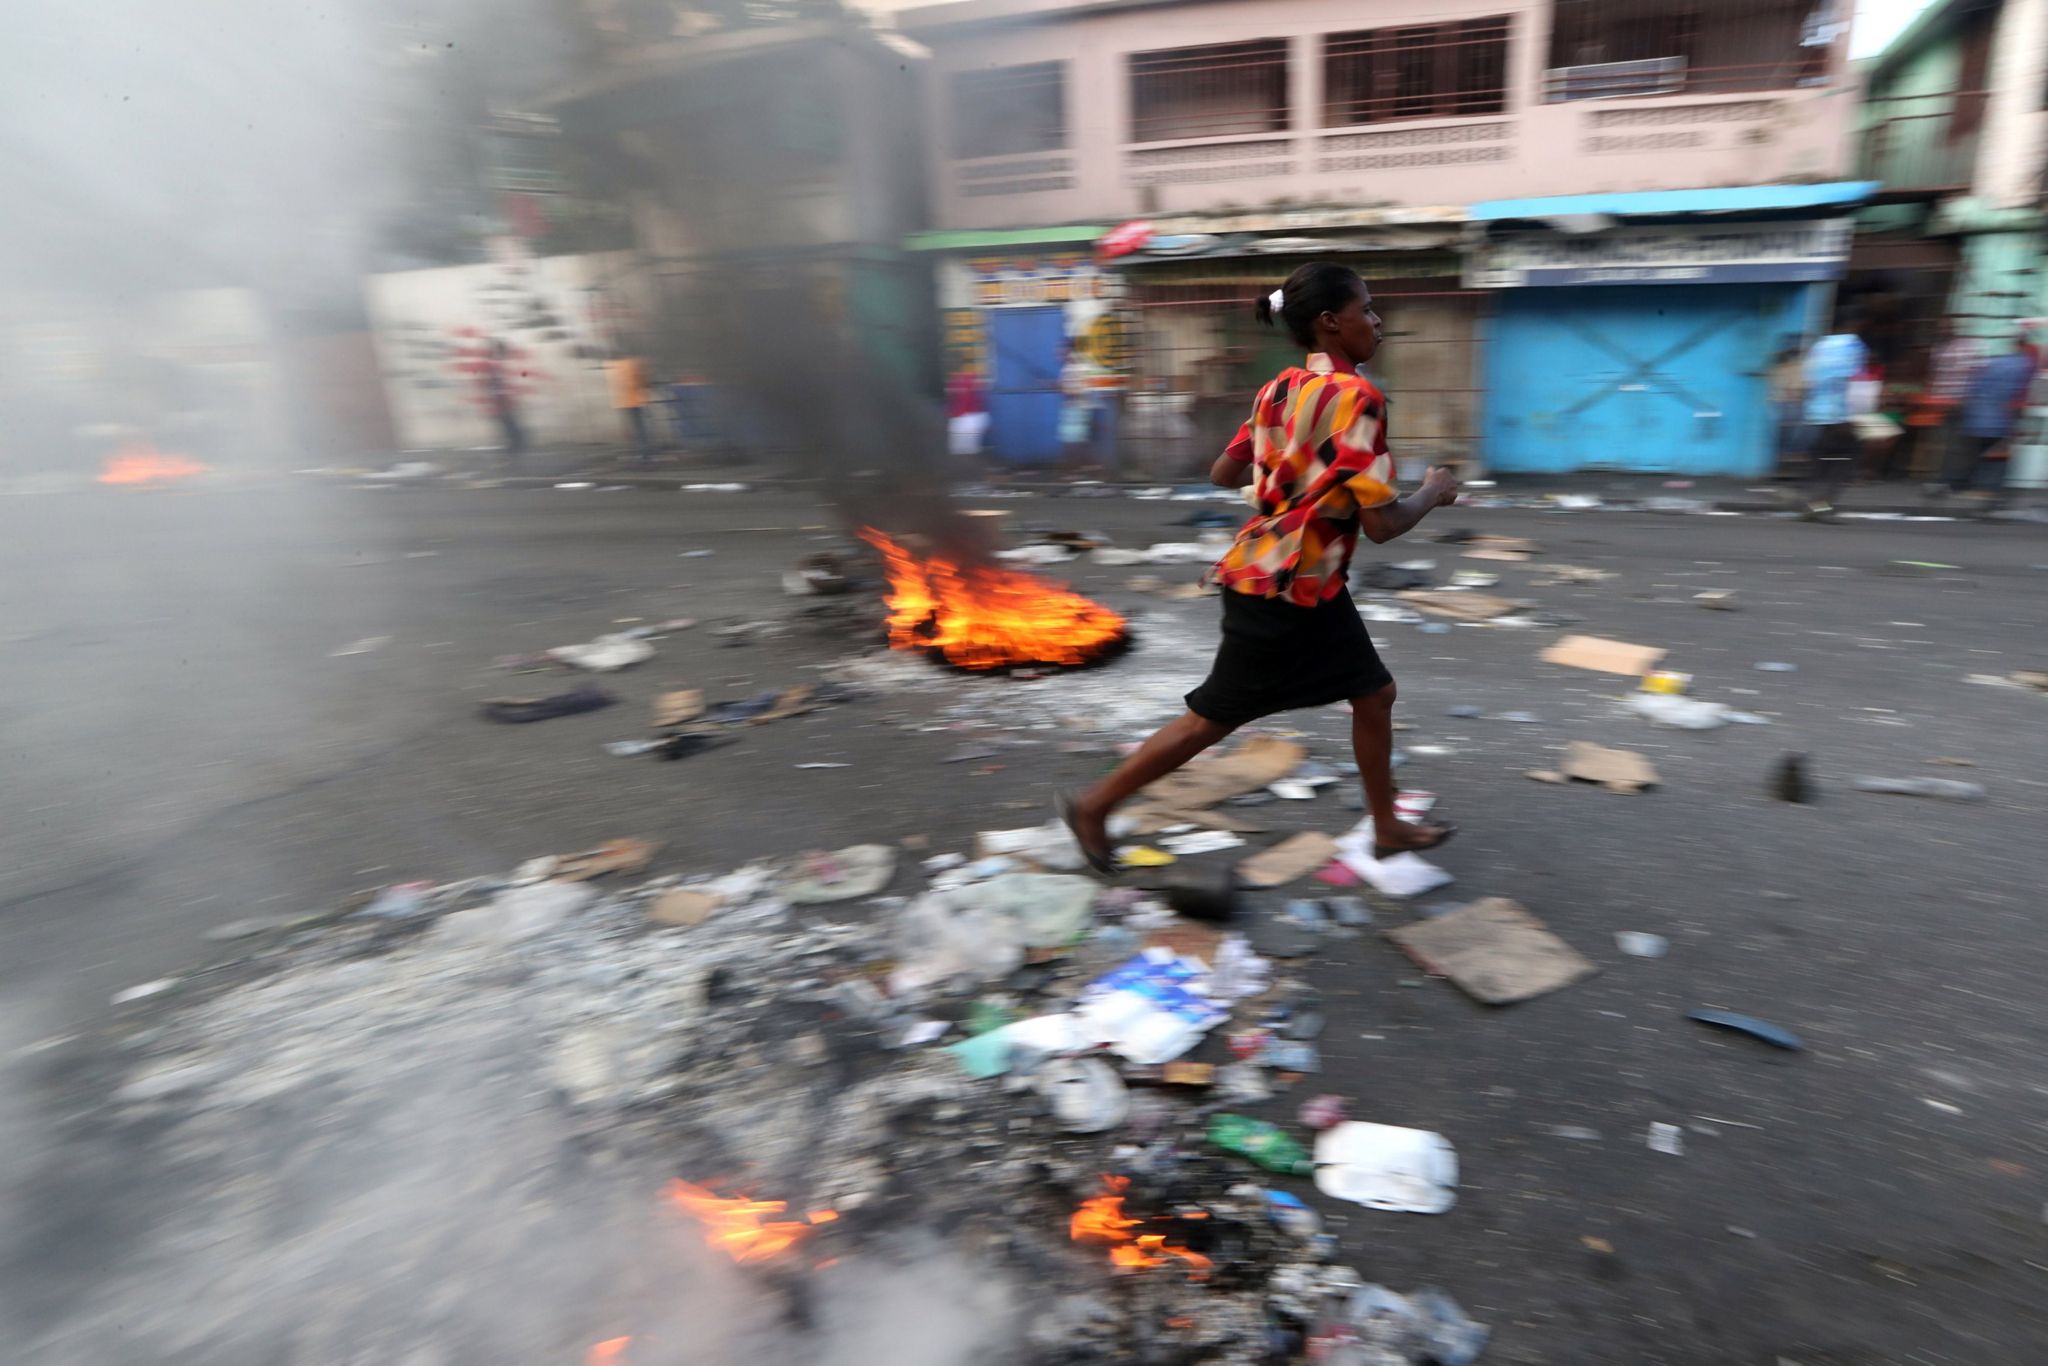 A woman walks past a burning barricade during anti-government protests in Port-au-Prince